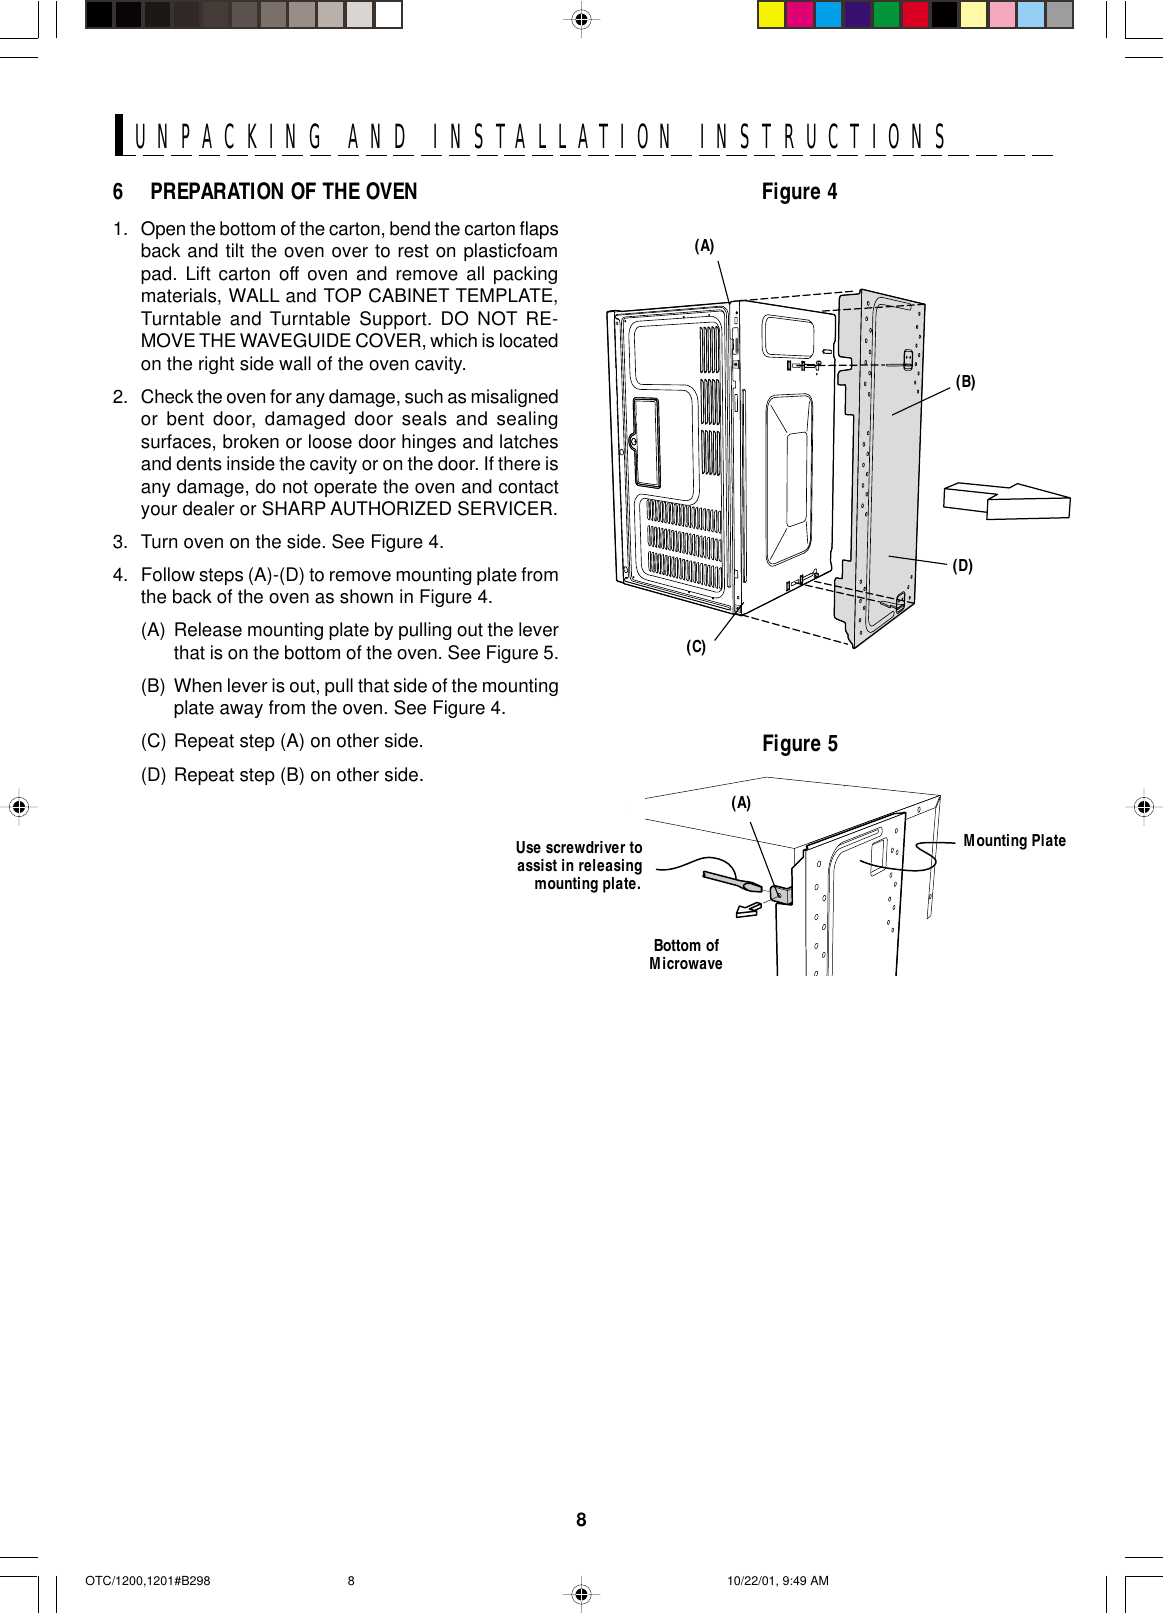 8UNPACKING AND INSTALLATION INSTRUCTIONS6 PREPARATION OF THE OVEN1. Open the bottom of the carton, bend the carton flapsback and tilt the oven over to rest on plasticfoampad. Lift carton off oven and remove all packingmaterials, WALL and TOP CABINET TEMPLATE,Turntable and Turntable Support. DO NOT RE-MOVE THE WAVEGUIDE COVER, which is locatedon the right side wall of the oven cavity.2. Check the oven for any damage, such as misalignedor bent door, damaged door seals and sealingsurfaces, broken or loose door hinges and latchesand dents inside the cavity or on the door. If there isany damage, do not operate the oven and contactyour dealer or SHARP AUTHORIZED SERVICER.3. Turn oven on the side. See Figure 4.4. Follow steps (A)-(D) to remove mounting plate fromthe back of the oven as shown in Figure 4.(A) Release mounting plate by pulling out the leverthat is on the bottom of the oven. See Figure 5.(B) When lever is out, pull that side of the mountingplate away from the oven. See Figure 4.(C) Repeat step (A) on other side.(D) Repeat step (B) on other side.Figure 5Use screwdriver toassist in releasingmounting plate.Mounting PlateBottom ofMicrowave(A)Figure 4(C)(D)(B)(A)OTC/1200,1201#B298 10/22/01, 9:49 AM8